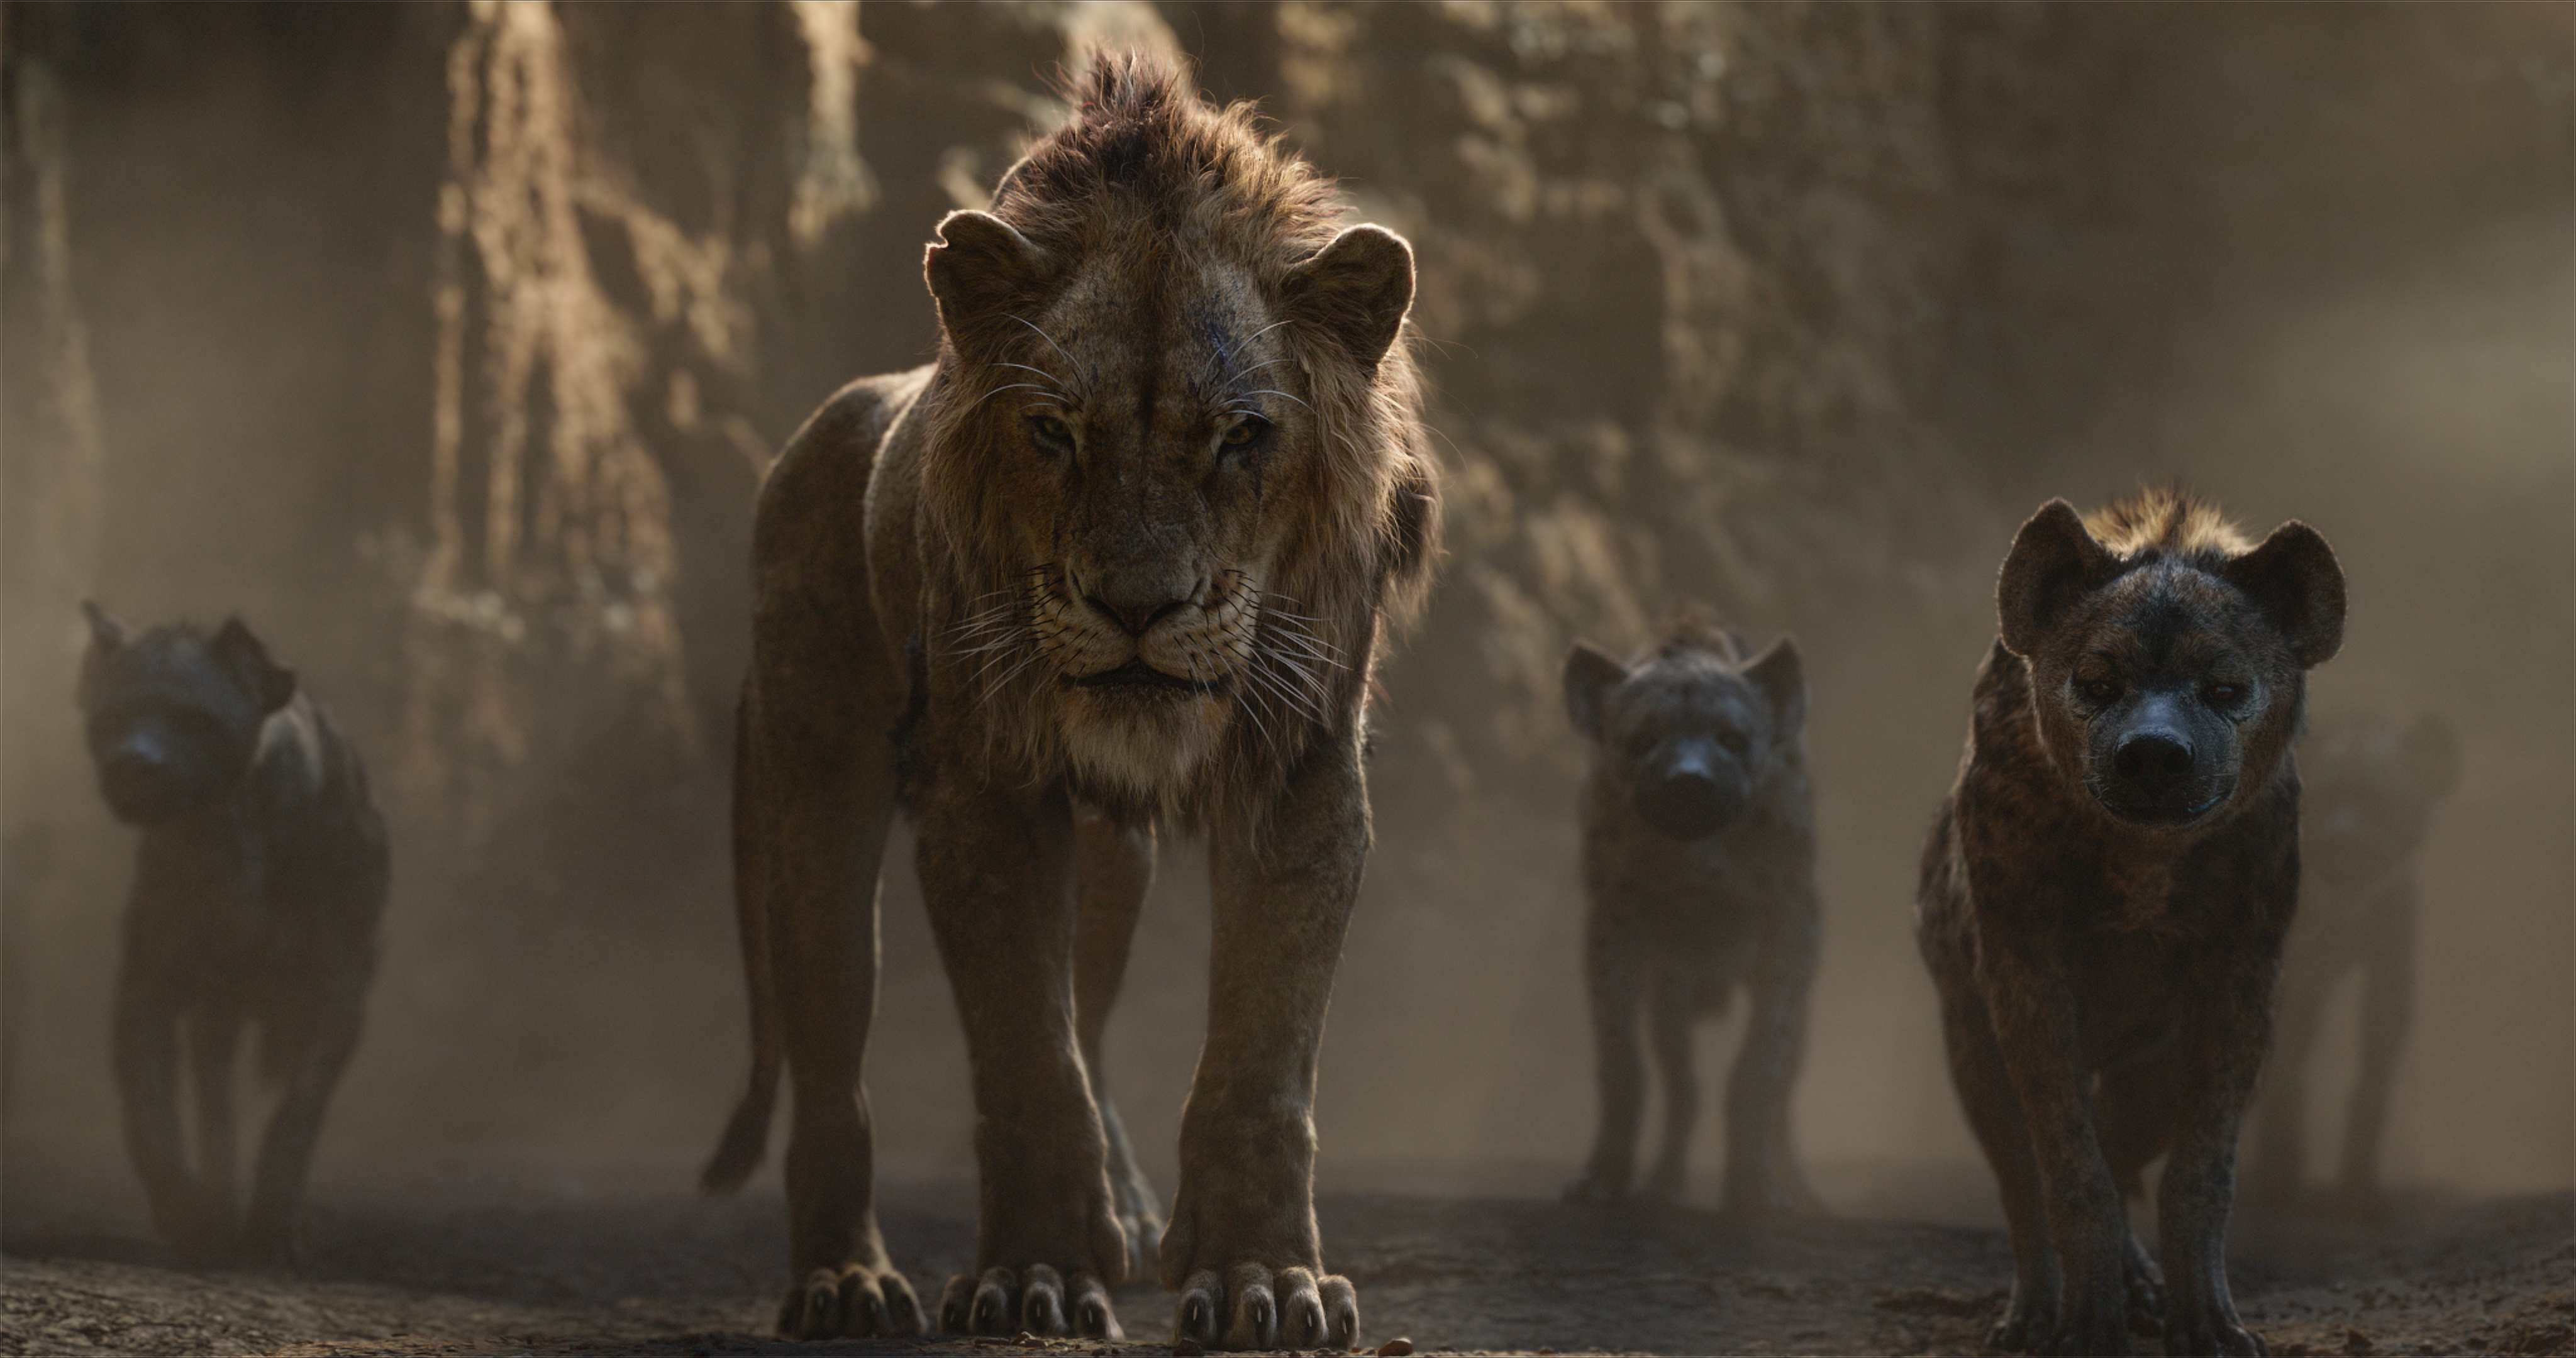 movie, the lion king (2019), scar (the lion king)